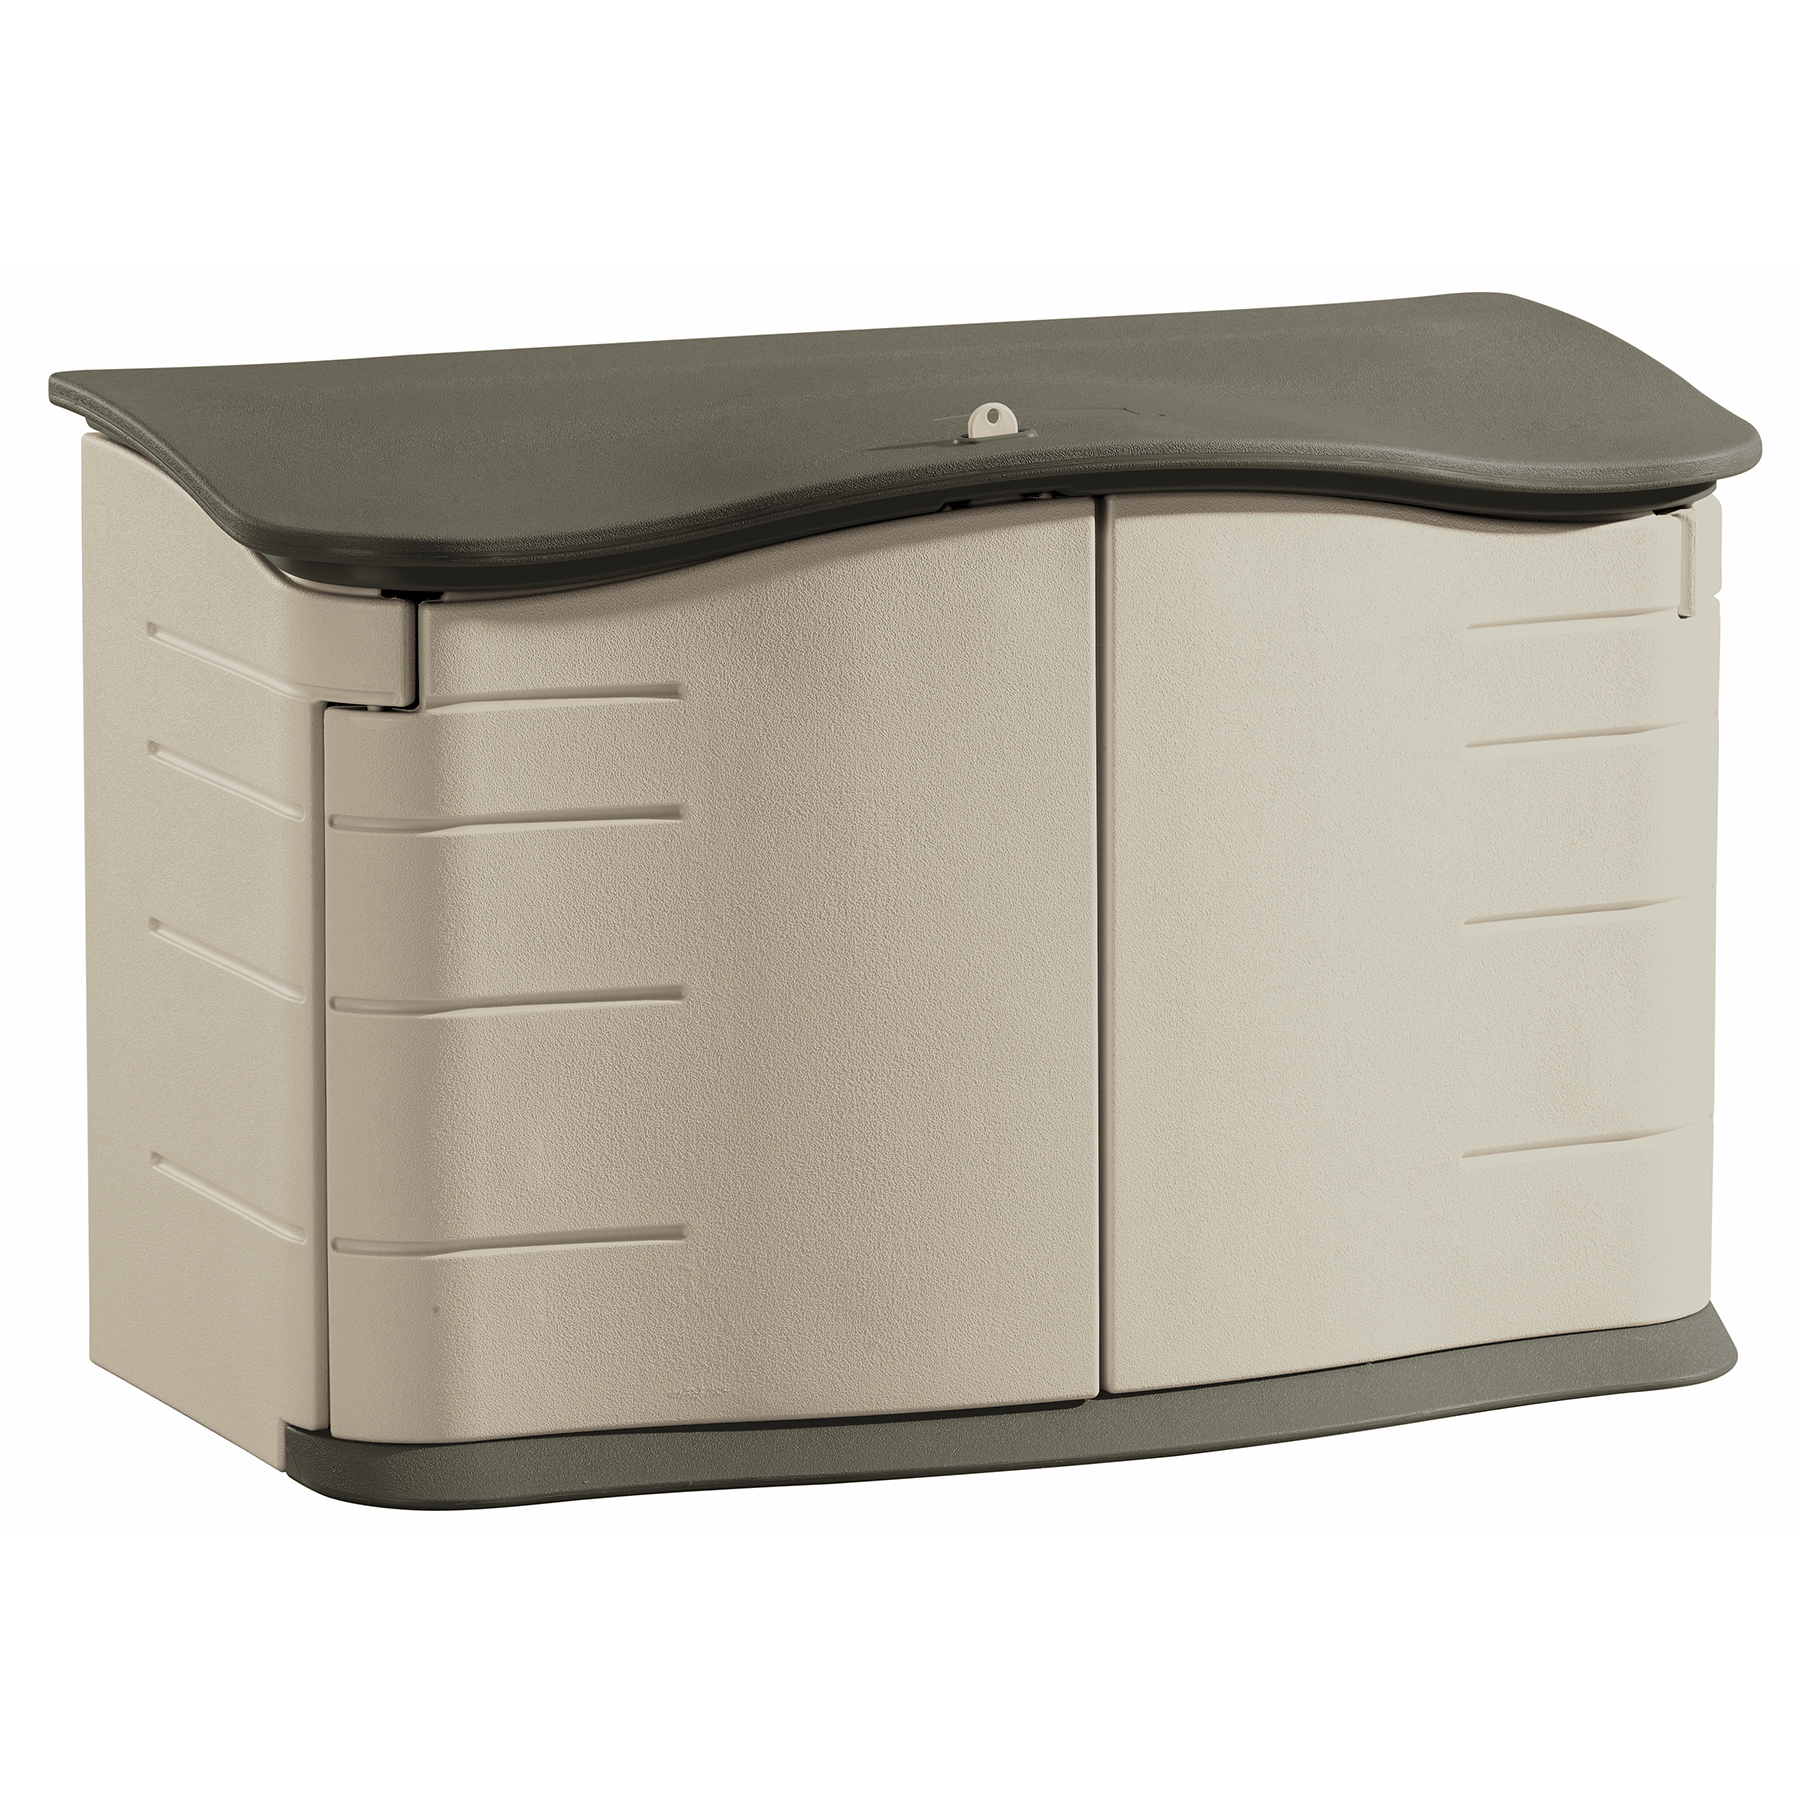 Rubbermaid Horizontal Storage Shed, Olive & Sandstone 58.5"L x 35.8"W x 11.8"H  49.7lbs - image 1 of 3